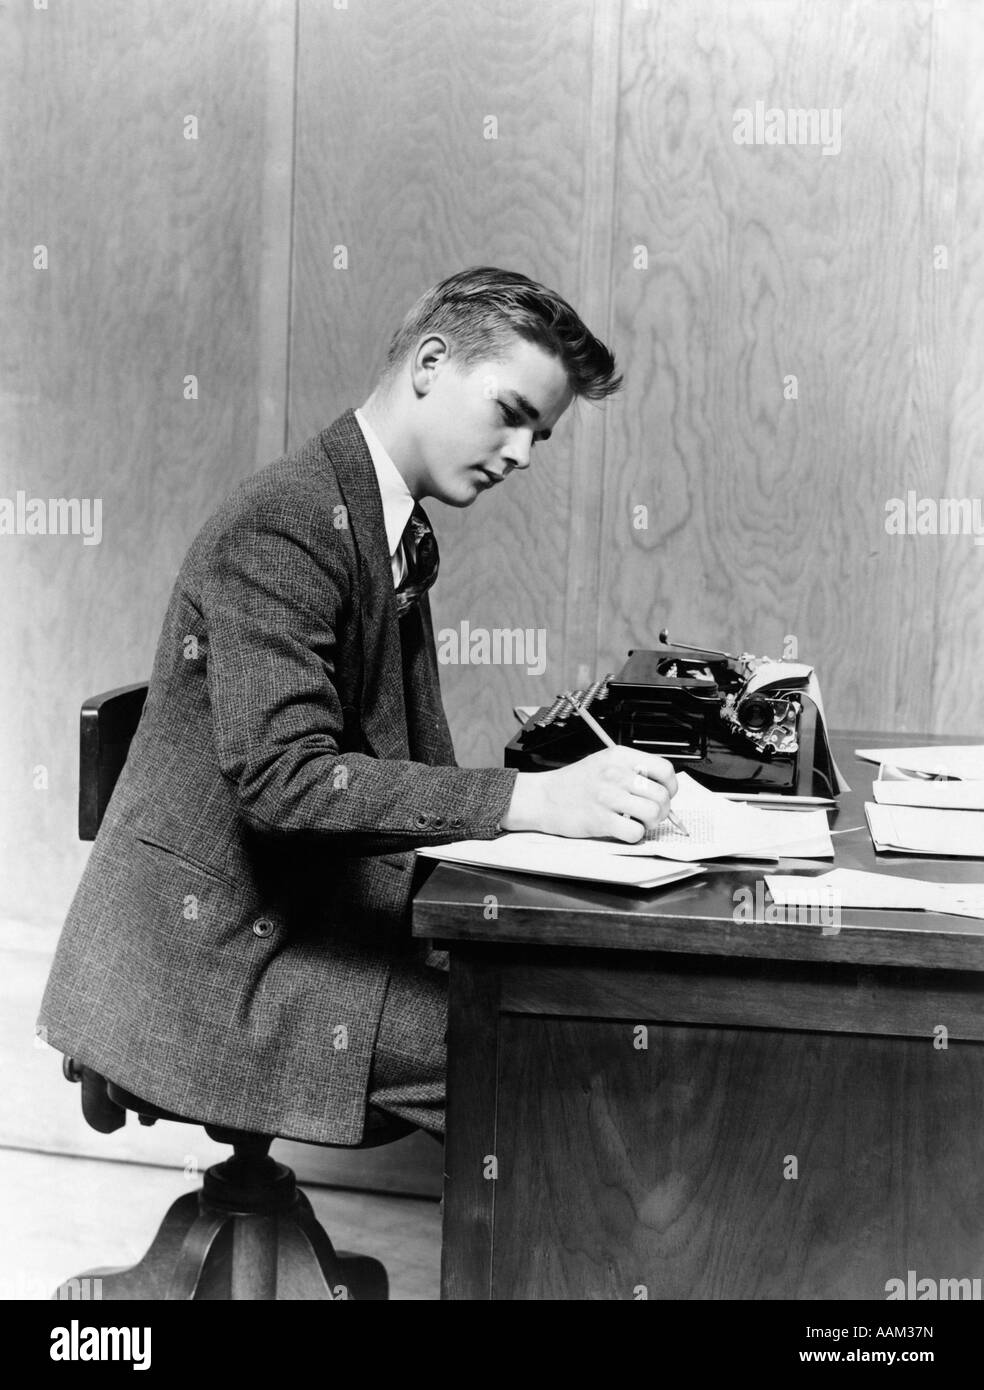 1940s YOUNG MAN SITTING AT DESK WRITING MANUAL TYPEWRITER STUDY COLLEGE  OFFICE BUSINESSMAN OR STUDENT Stock Photo - Alamy